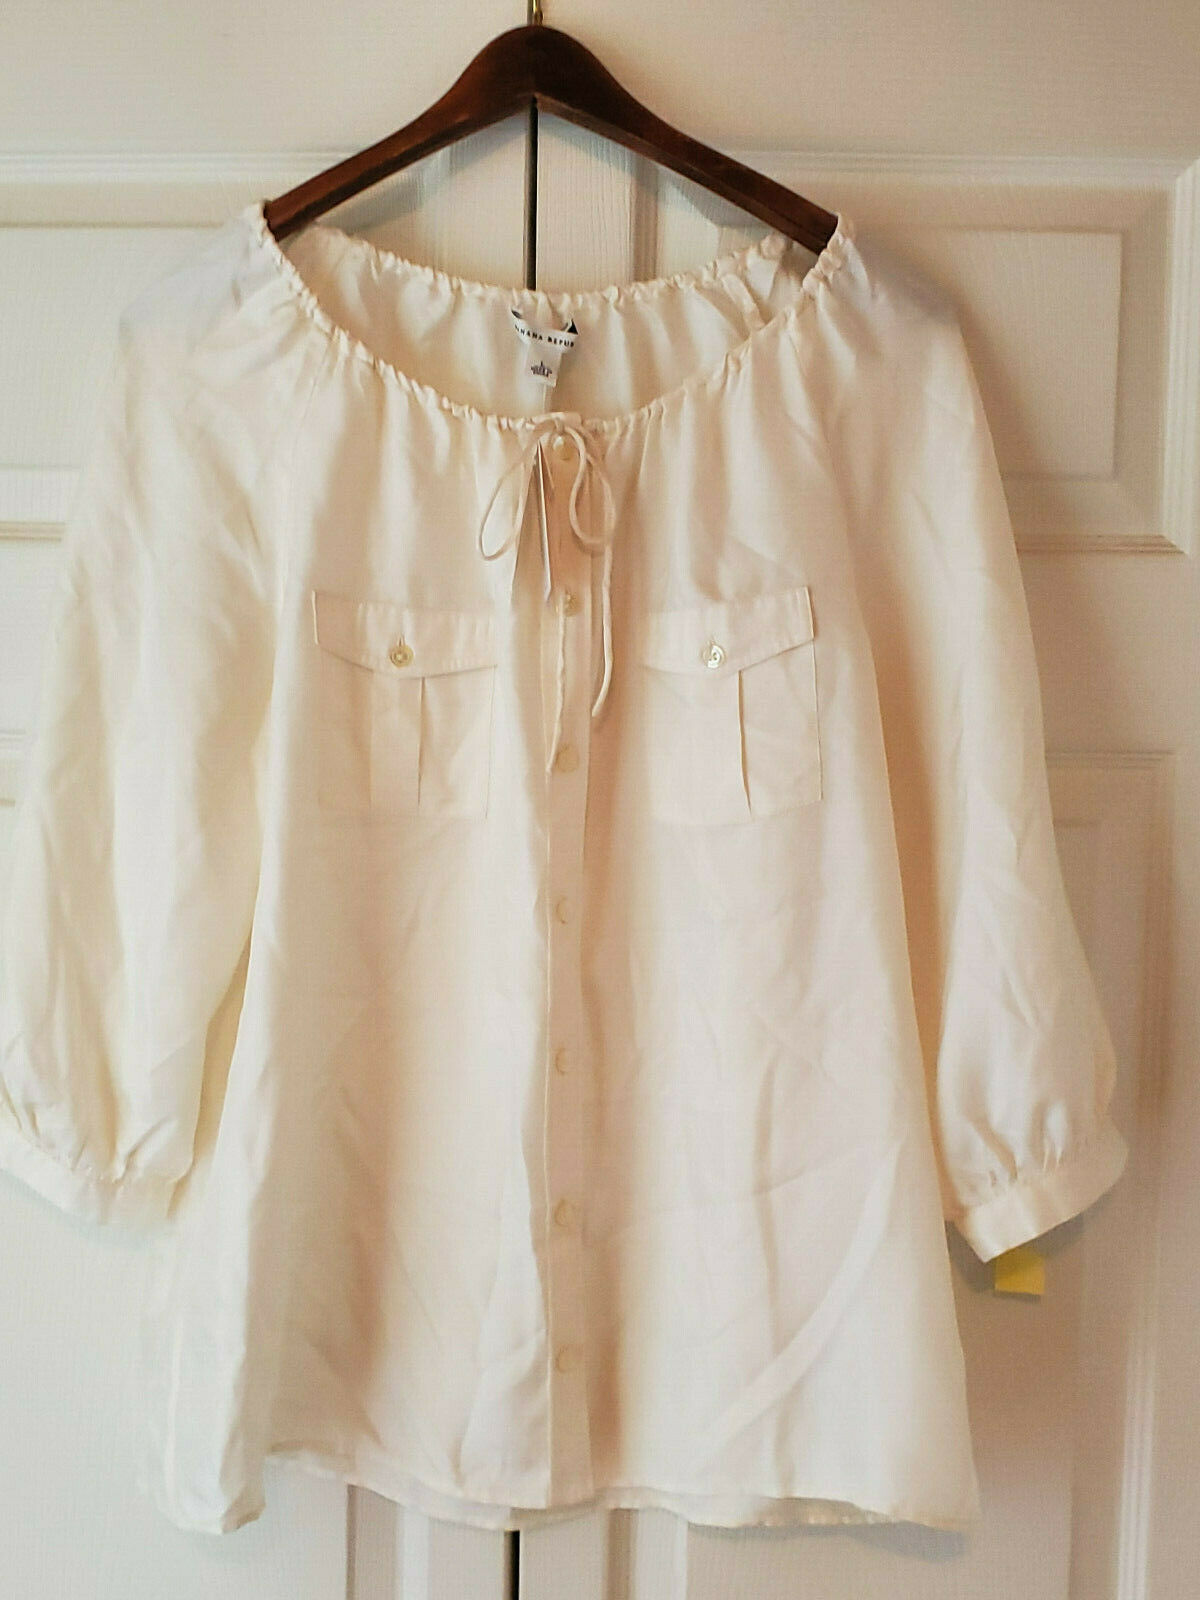 Primary image for Banana Republic Women's 100% Silk Beige Long Sleeve Size Large Blouse (NEW)